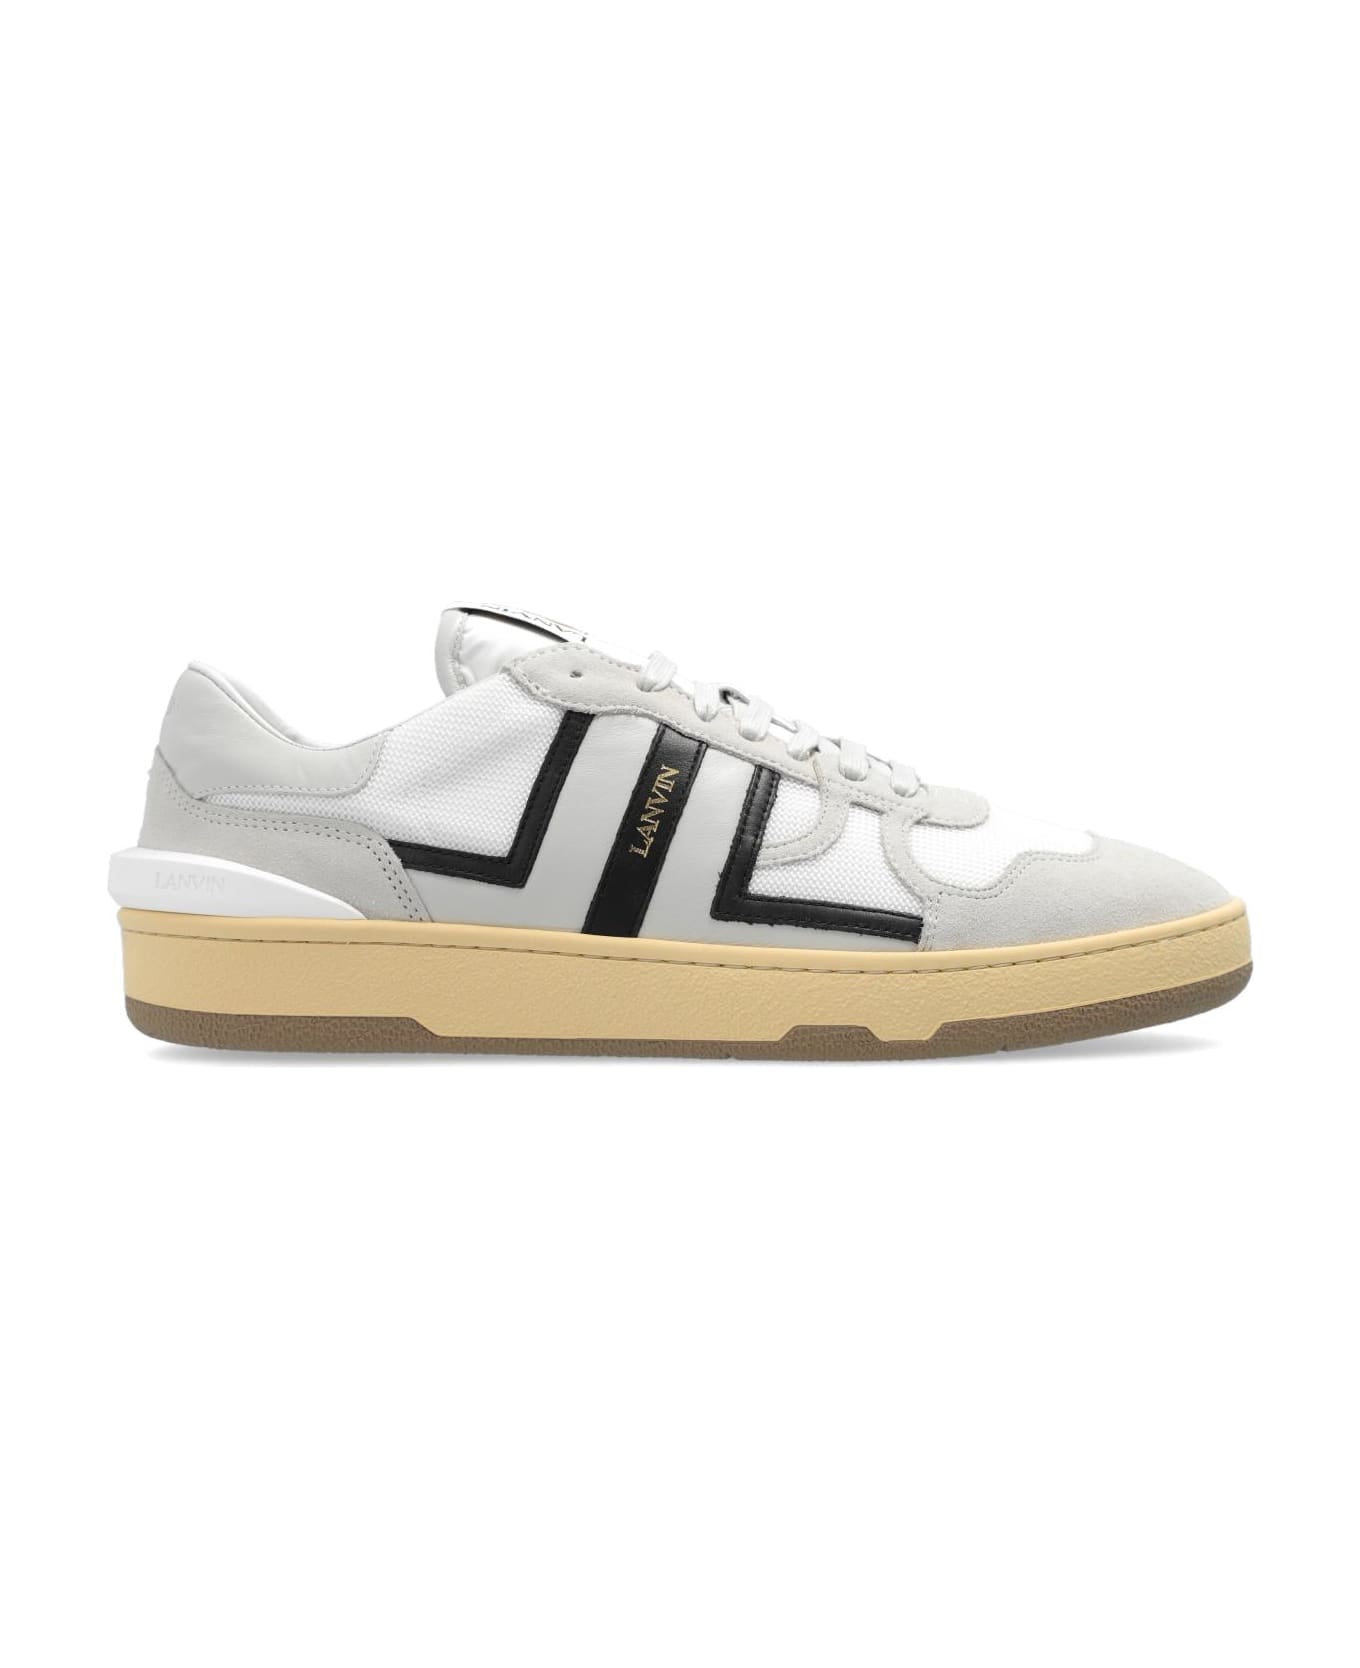 Lanvin 'clay Low' Sneakers - Black/off White スニーカー